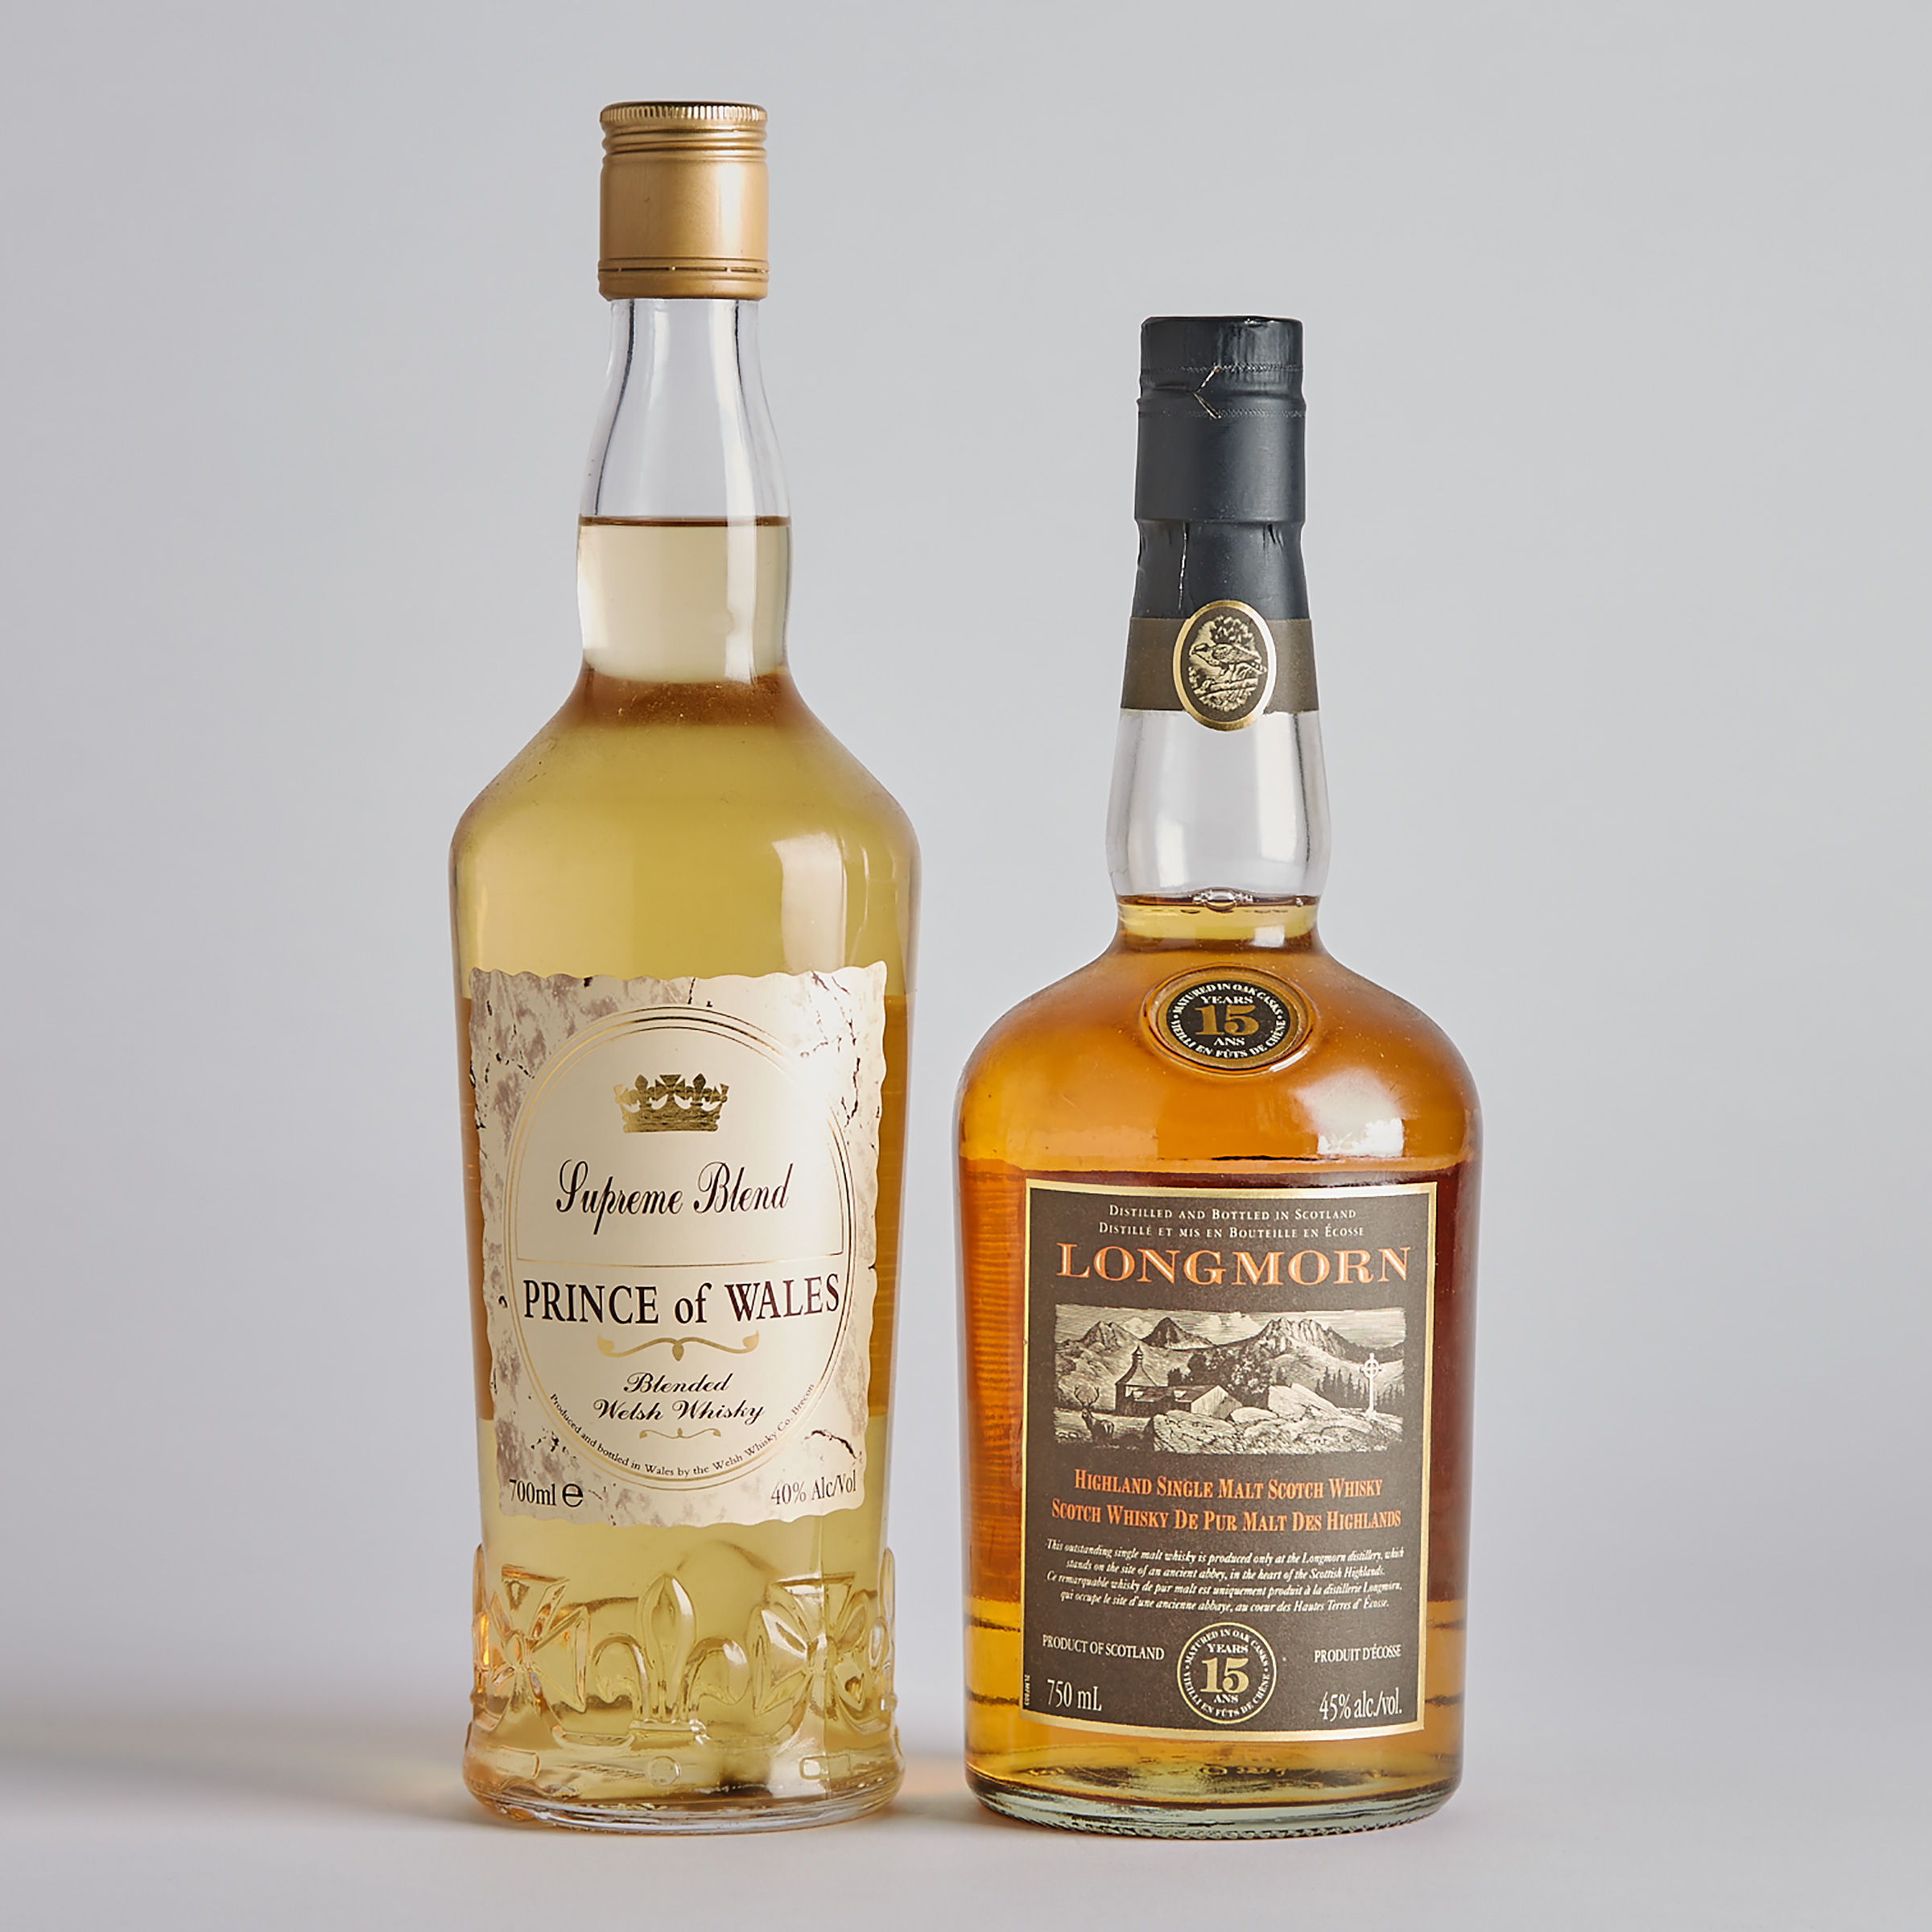 LONGMORN HIGHLAND SINGLE MALT SCOTCH WHISKY 15 YEARS (ONE 750 ML)
PRINCE OF WALES BLENDED WELSH WHISKY NAS (ONE 700 ML)